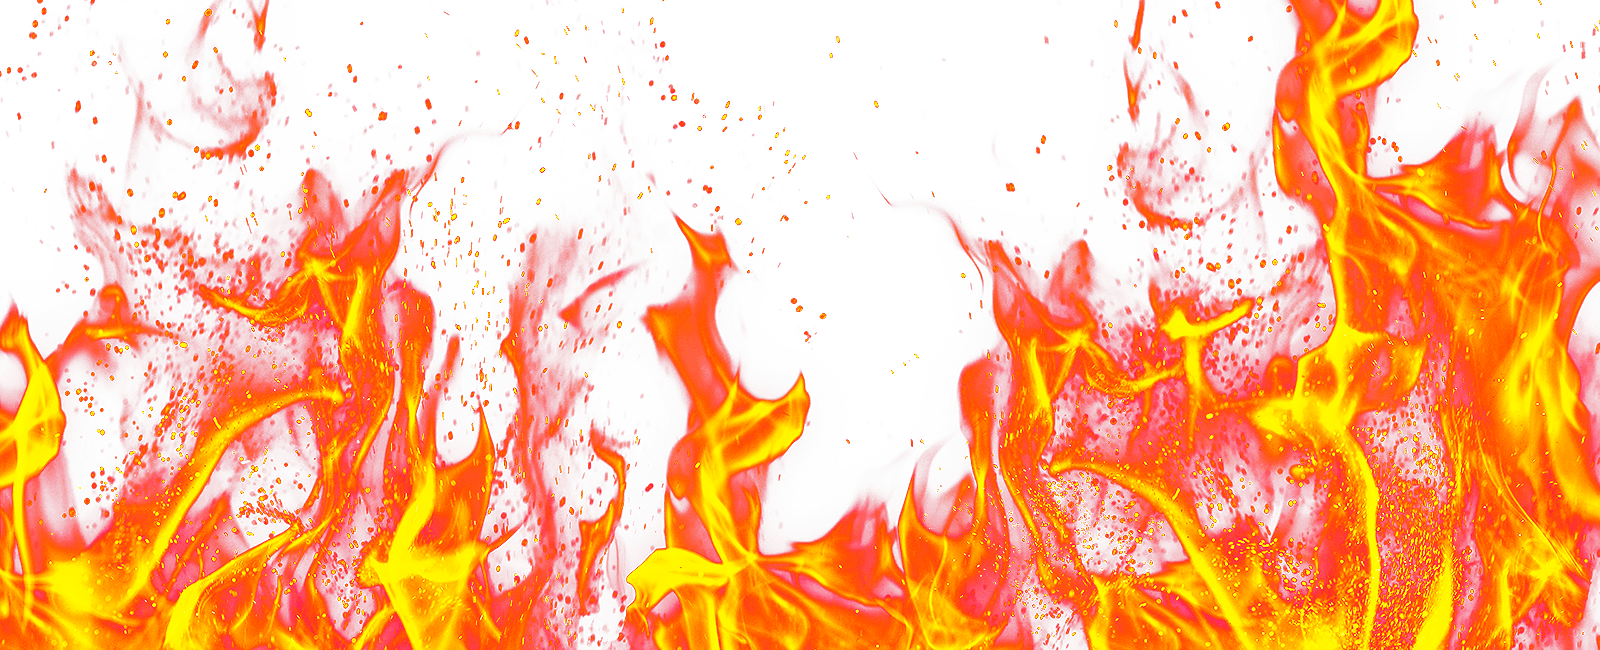 Fire PNG Image Photo